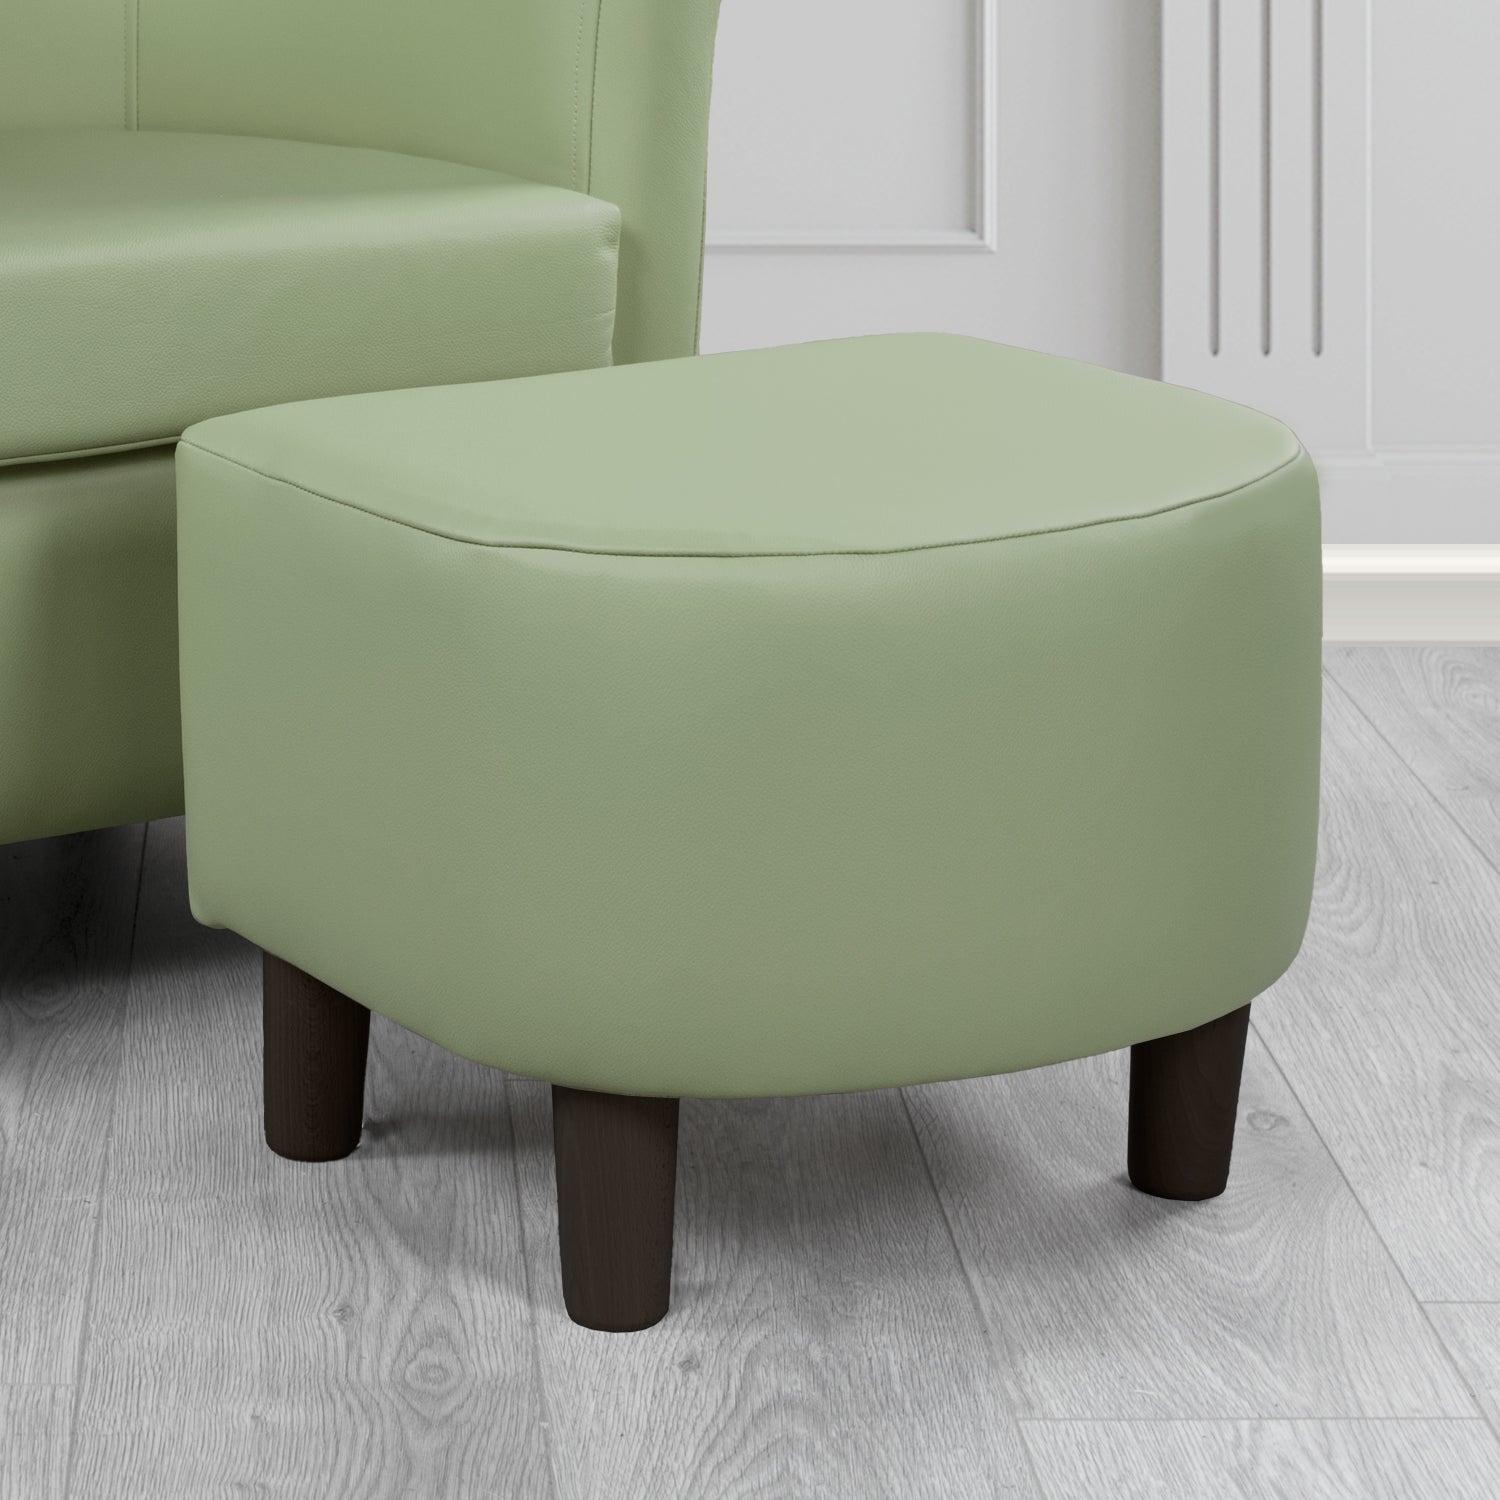 Tuscany Shelly Thyme Green Crib 5 Genuine Leather Footstool (4624800710698)